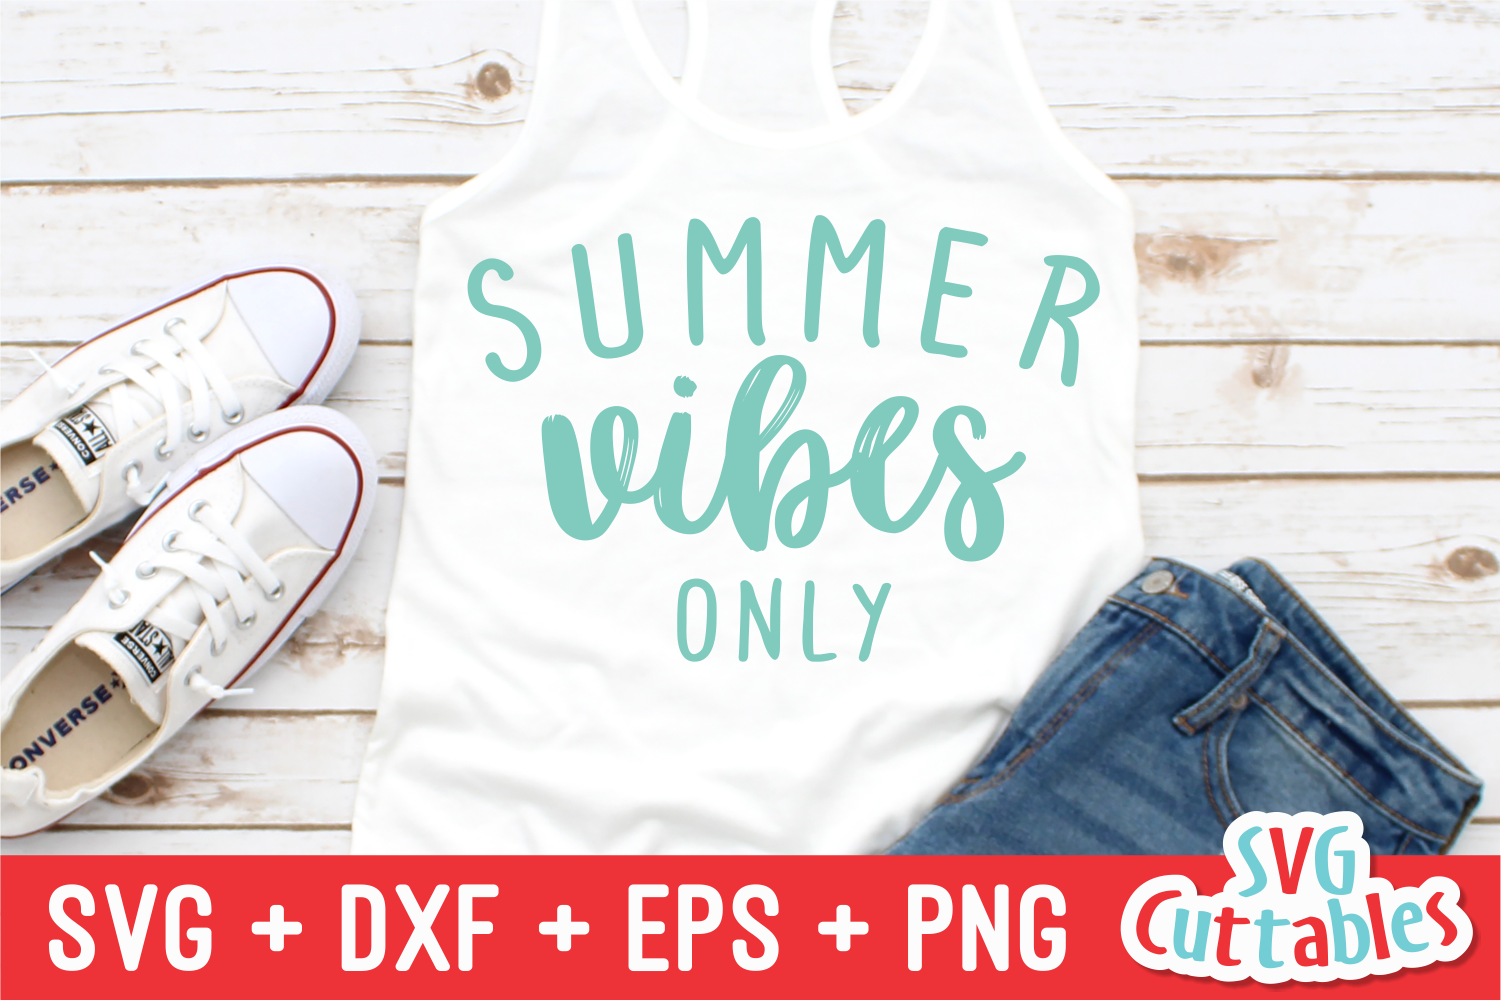 Download Summer Vibes Only | SVG Cut File By Svg Cuttables ...